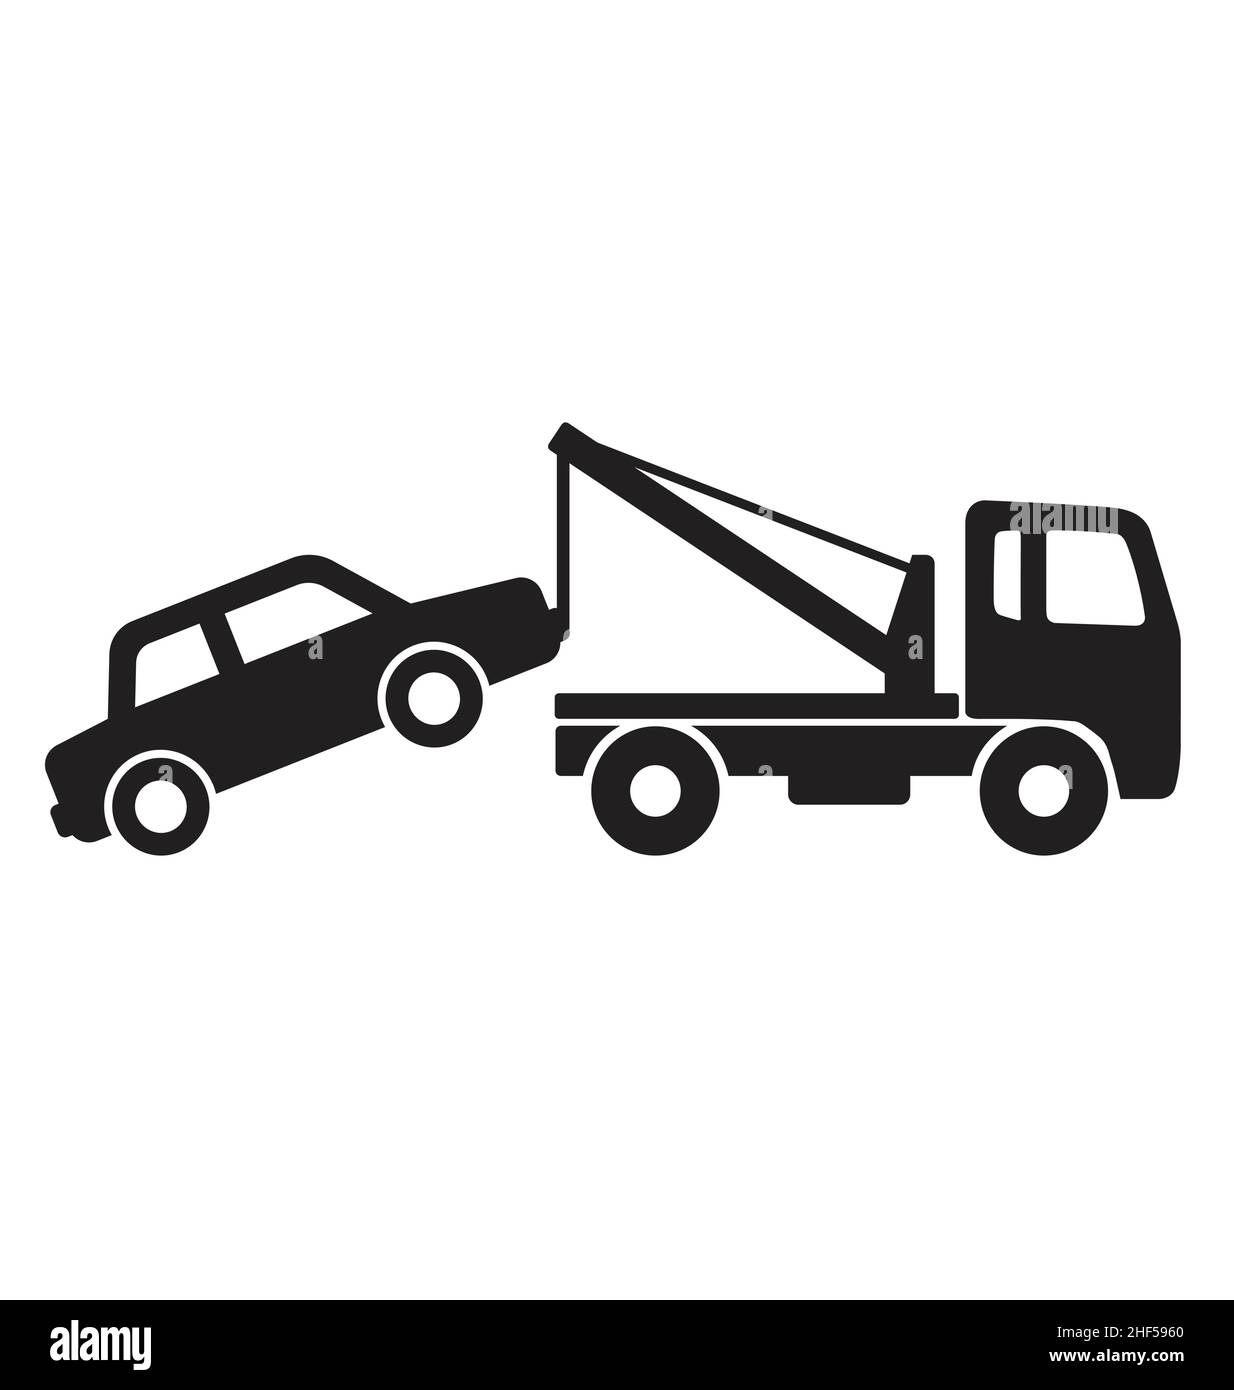 simple tow truck towing broken down car black silhouette side view icon symbol vector isolated on white background Stock Vector